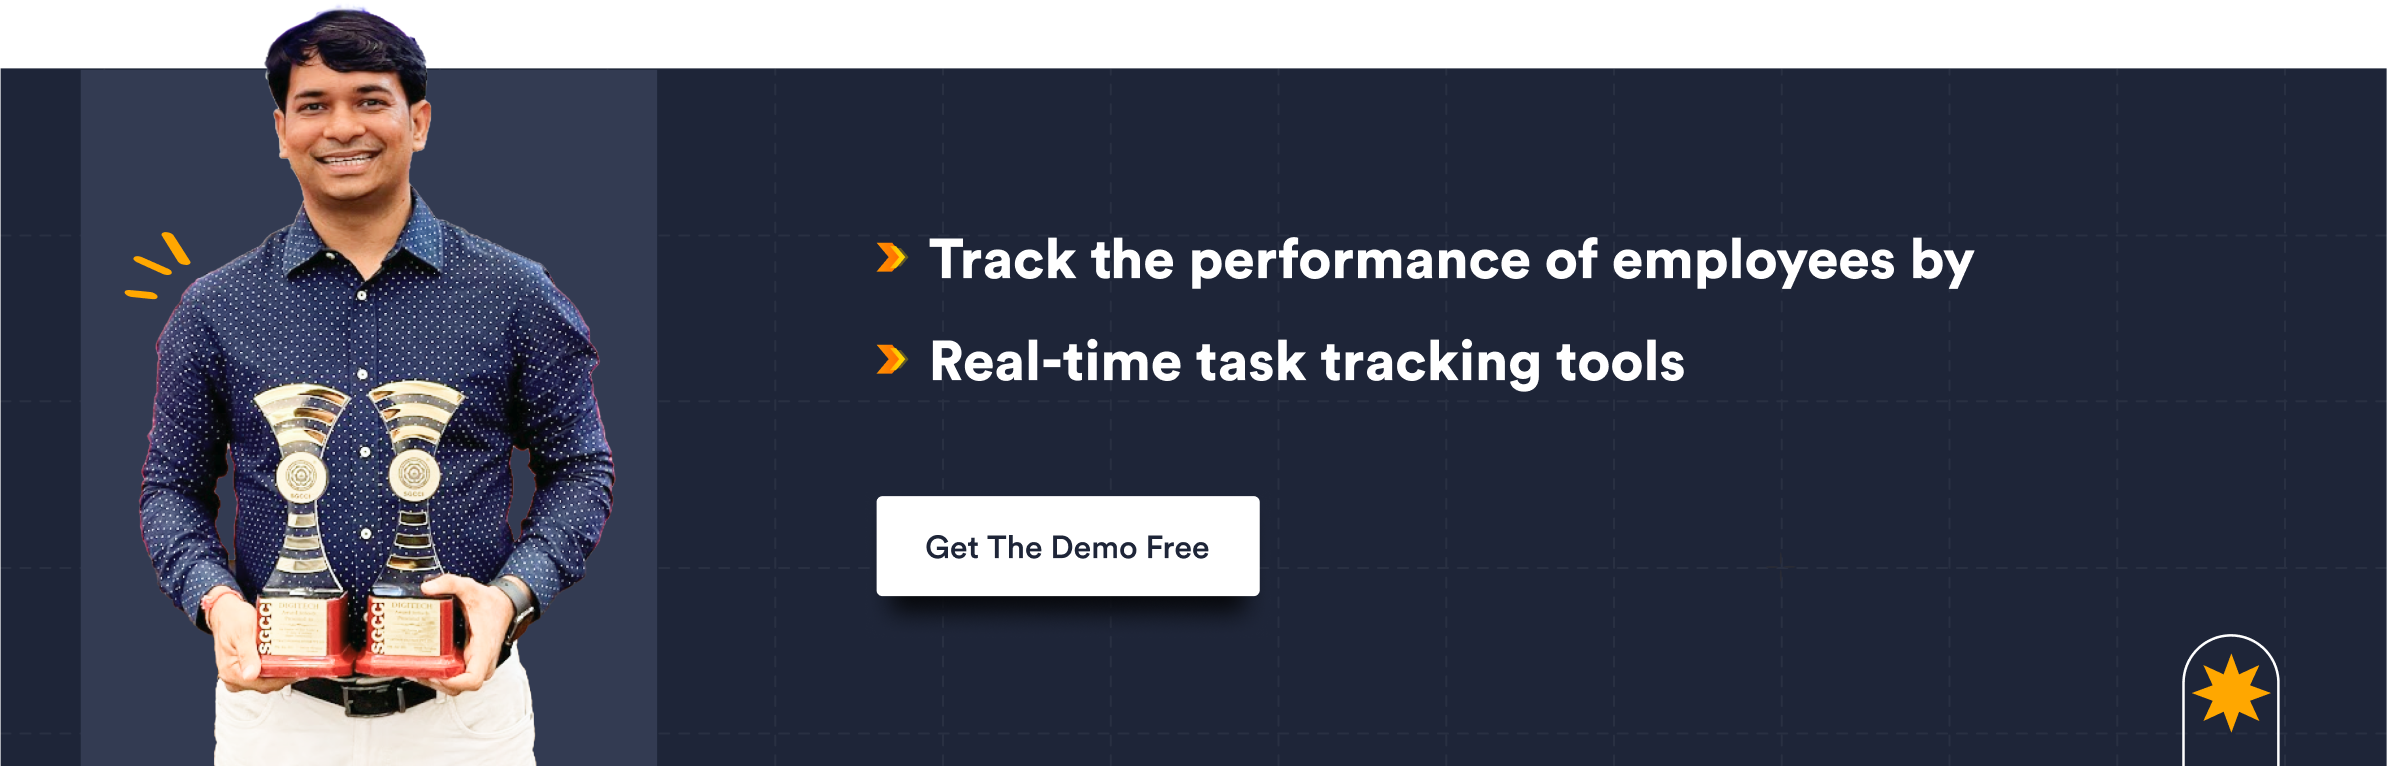 Track the performance of employees by 1